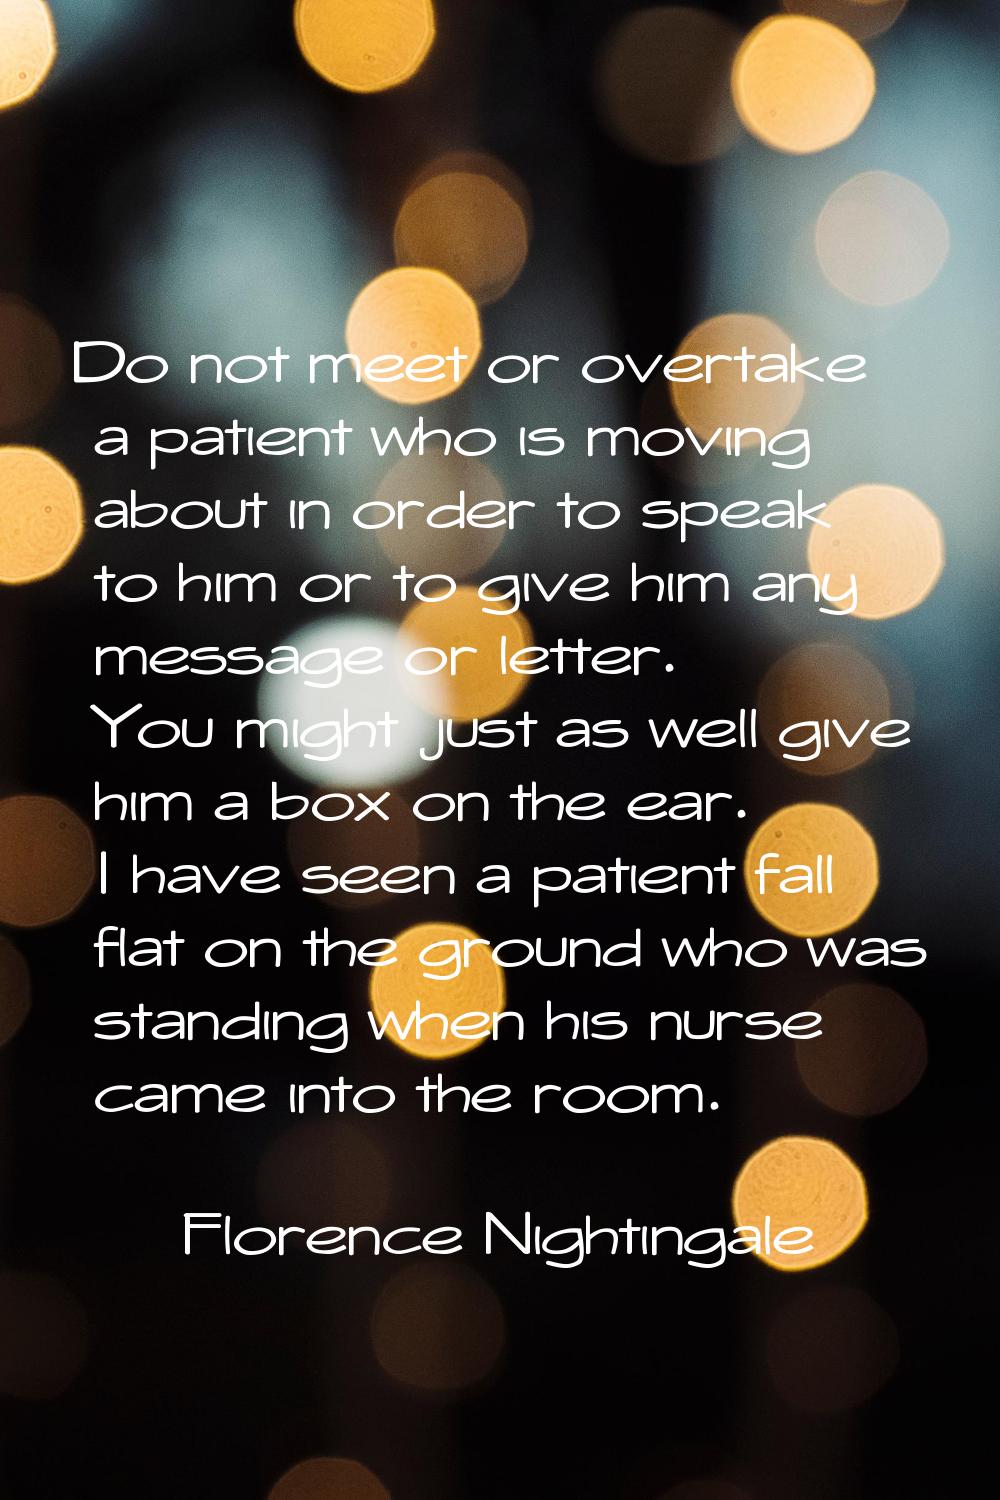 Do not meet or overtake a patient who is moving about in order to speak to him or to give him any m